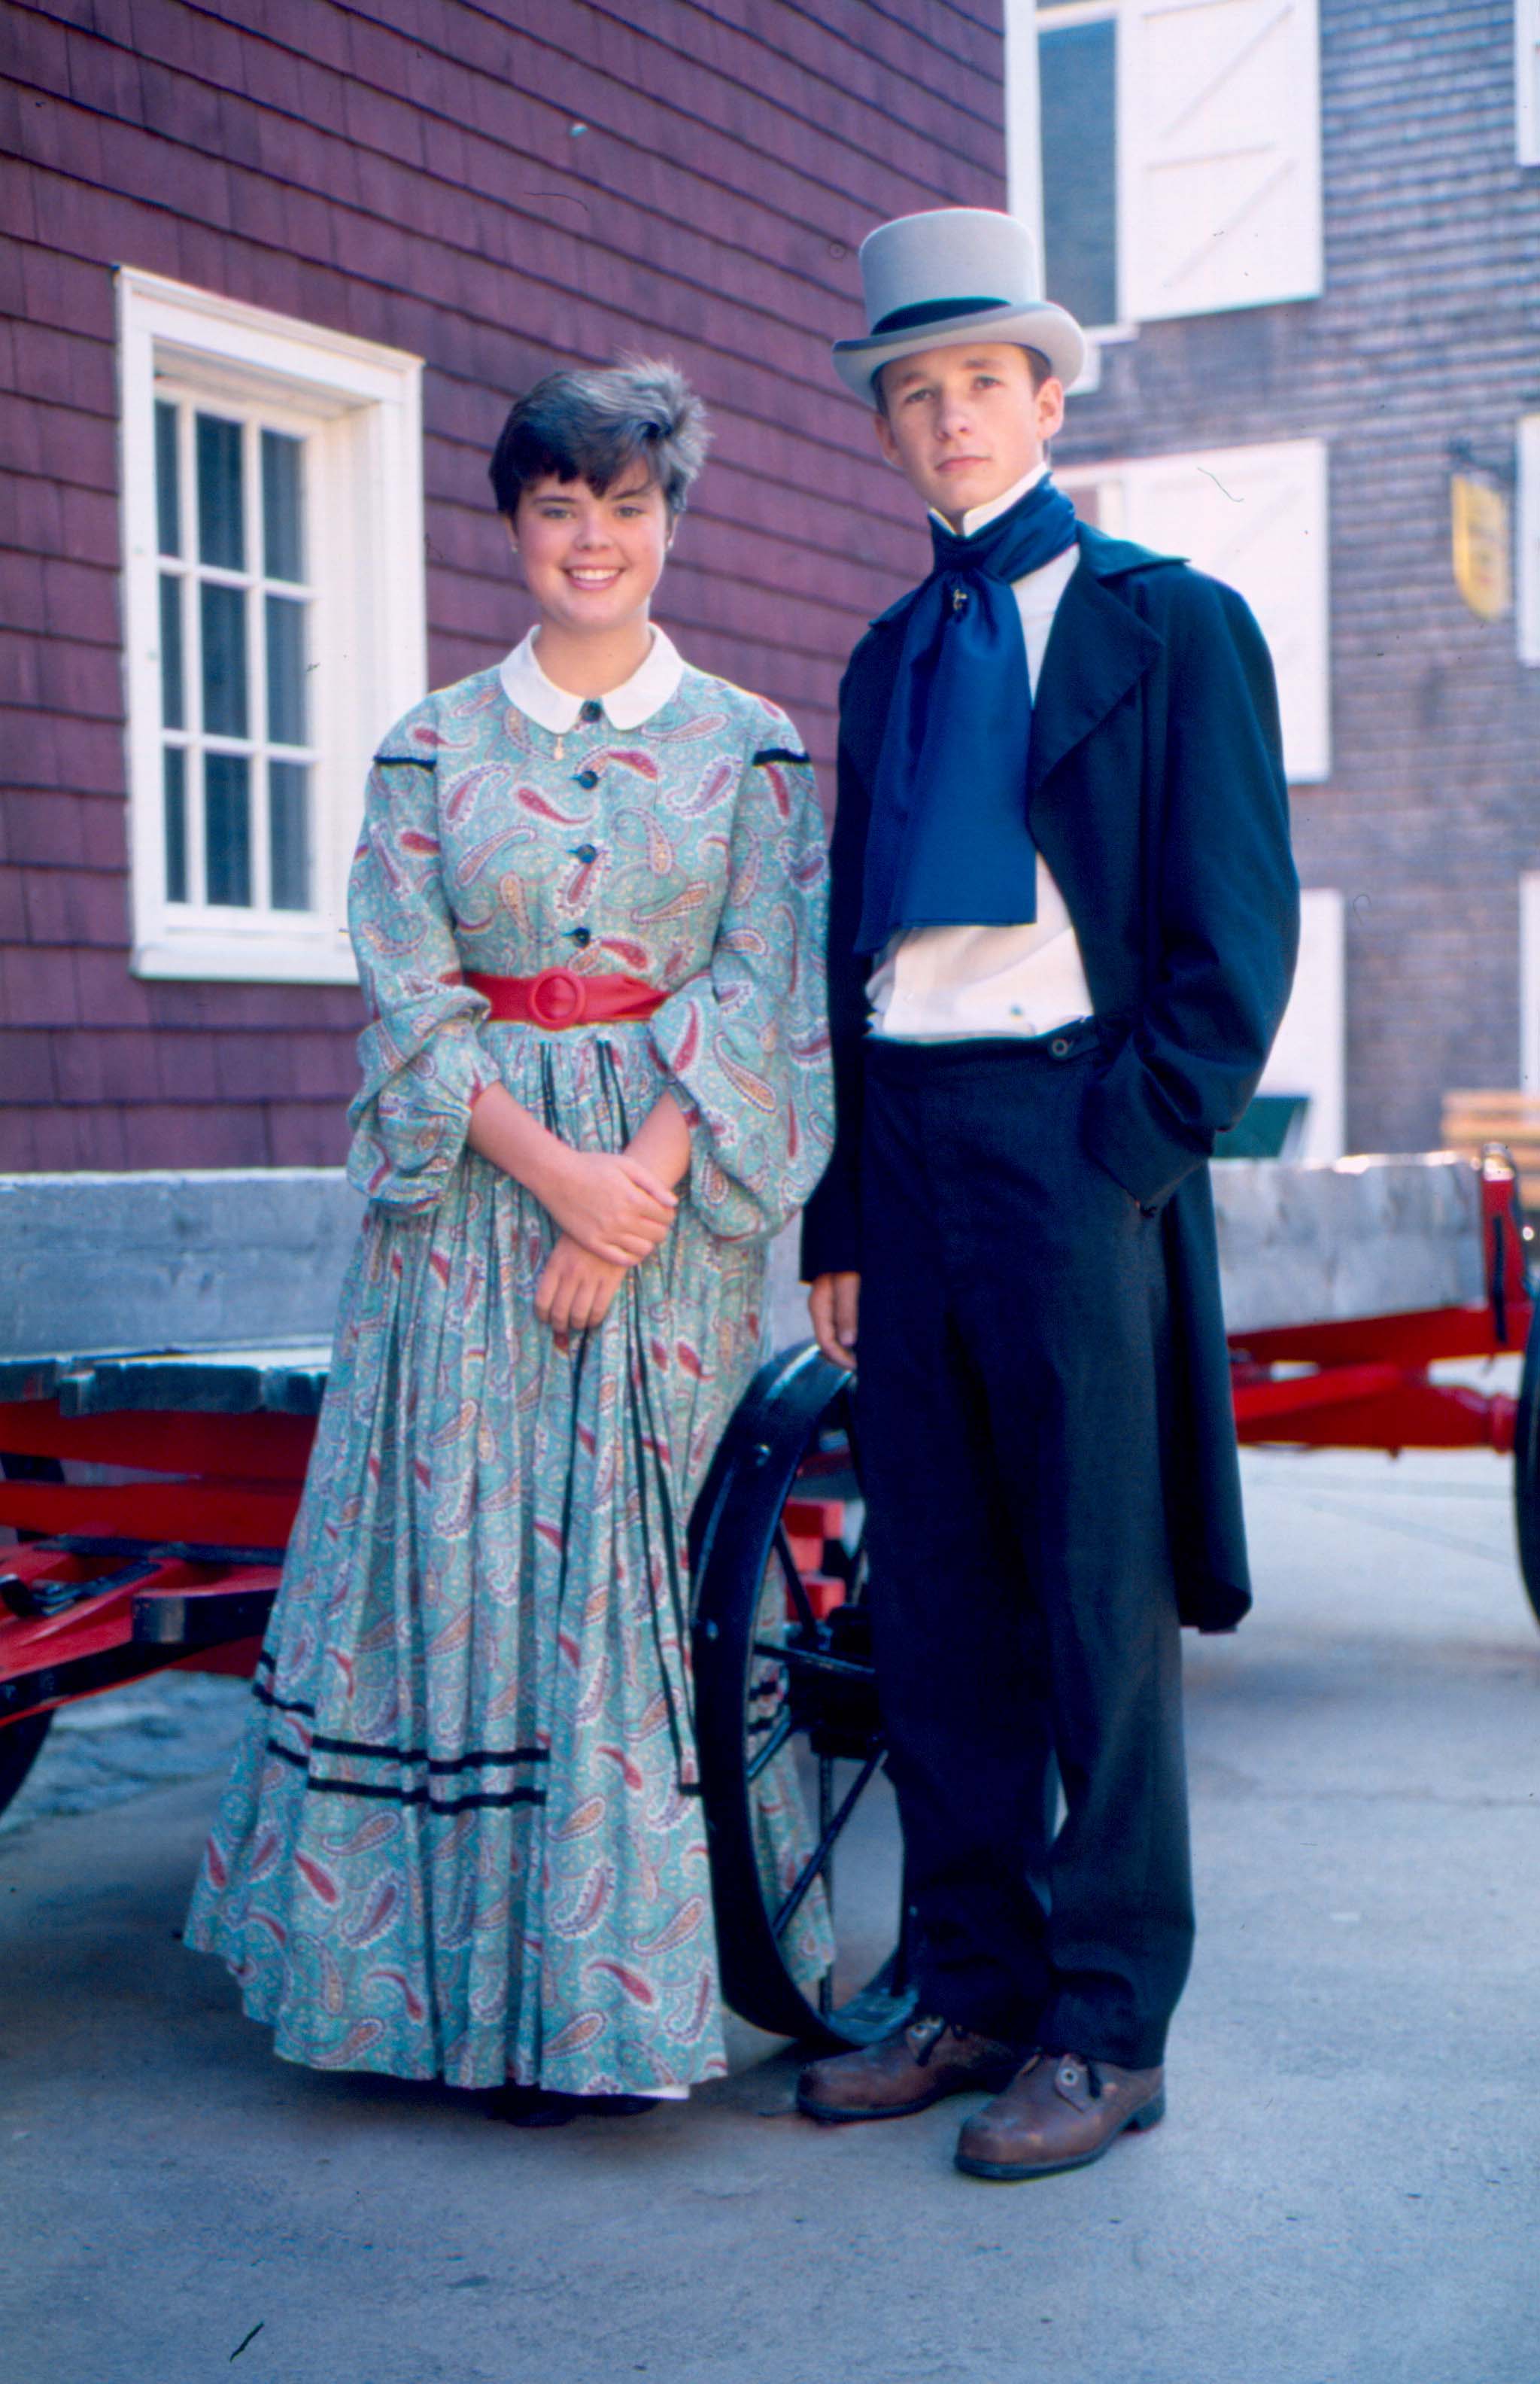 Colour photo of the two youngsters in Victorian dress at Historic Properties